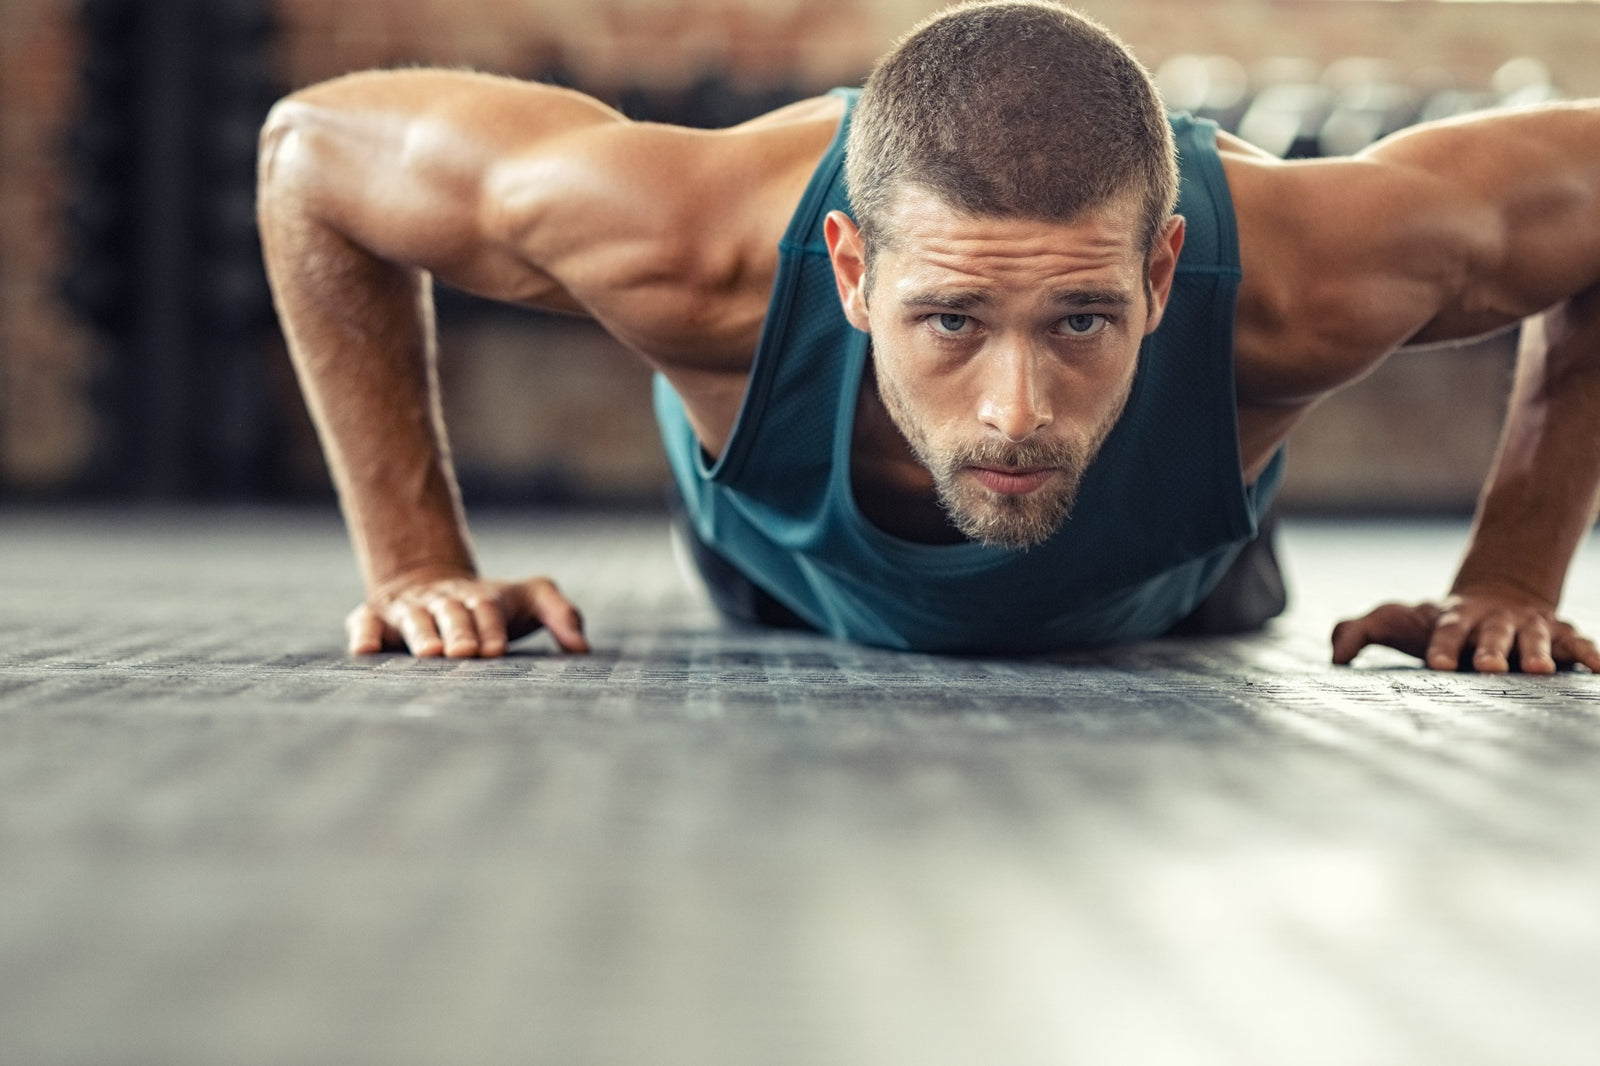 Men who can do 40 push-ups far less likely to develop heart